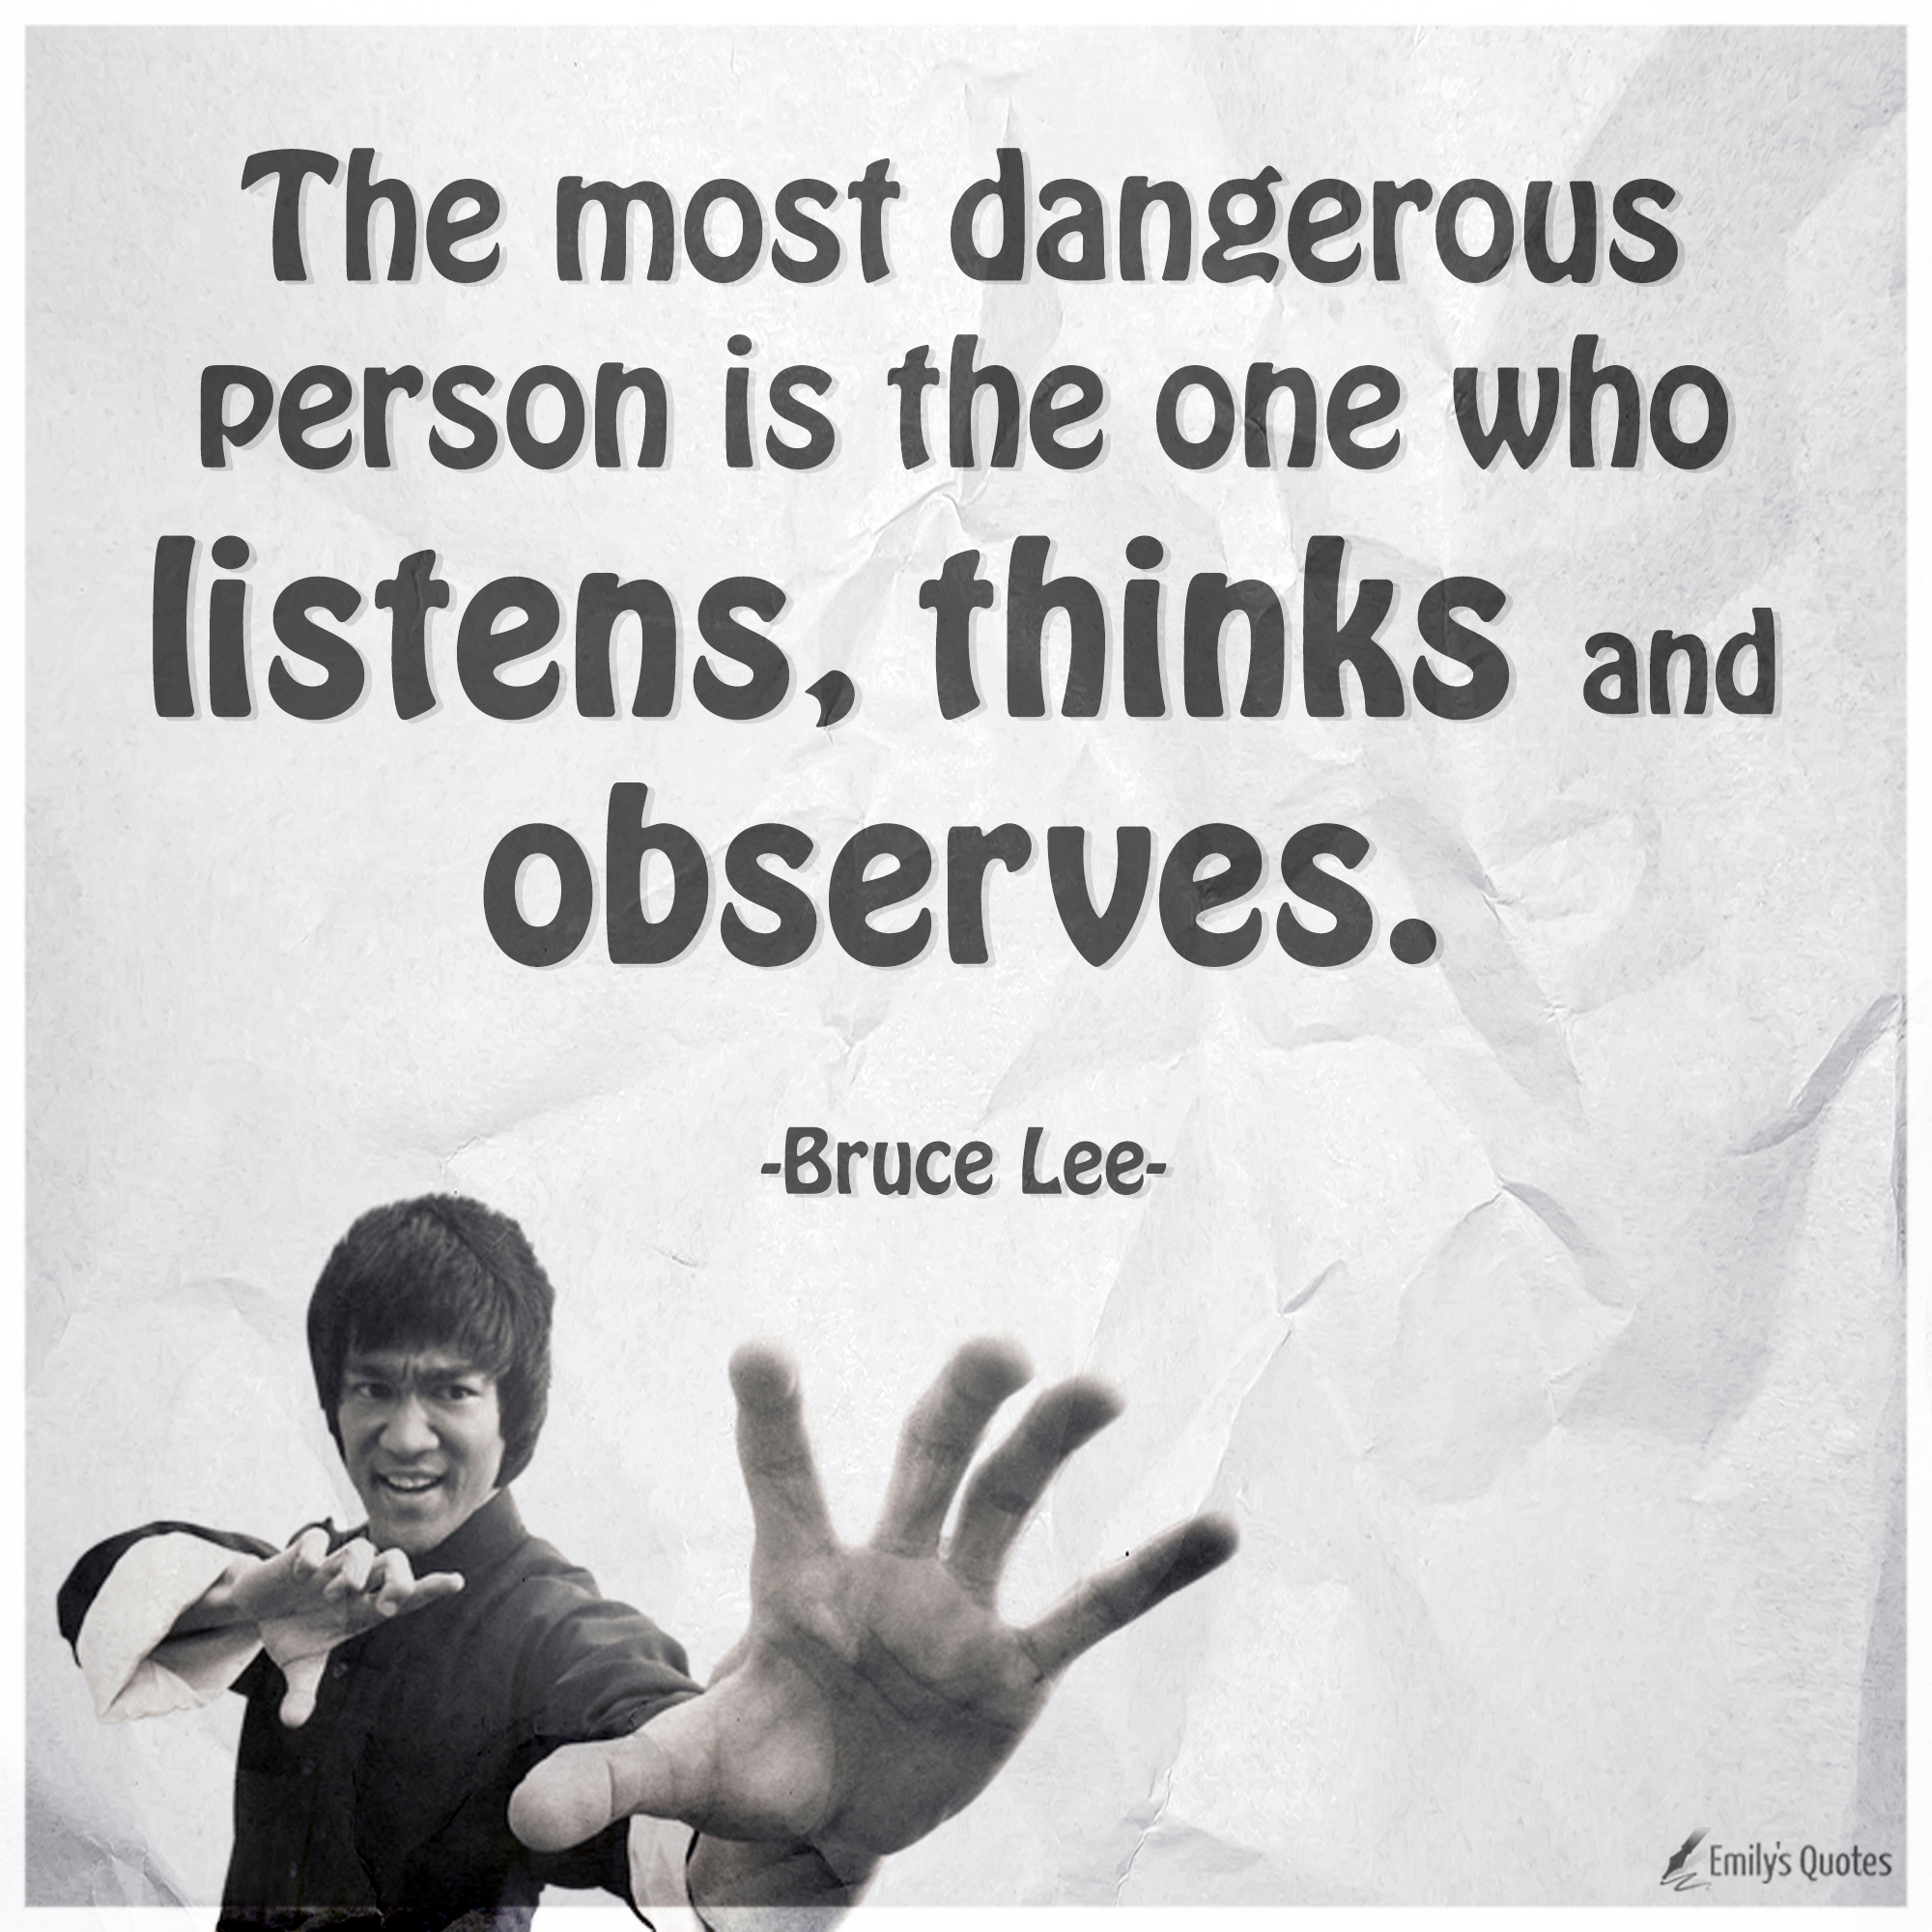 The most dangerous person is the one who listens, thinks and observes